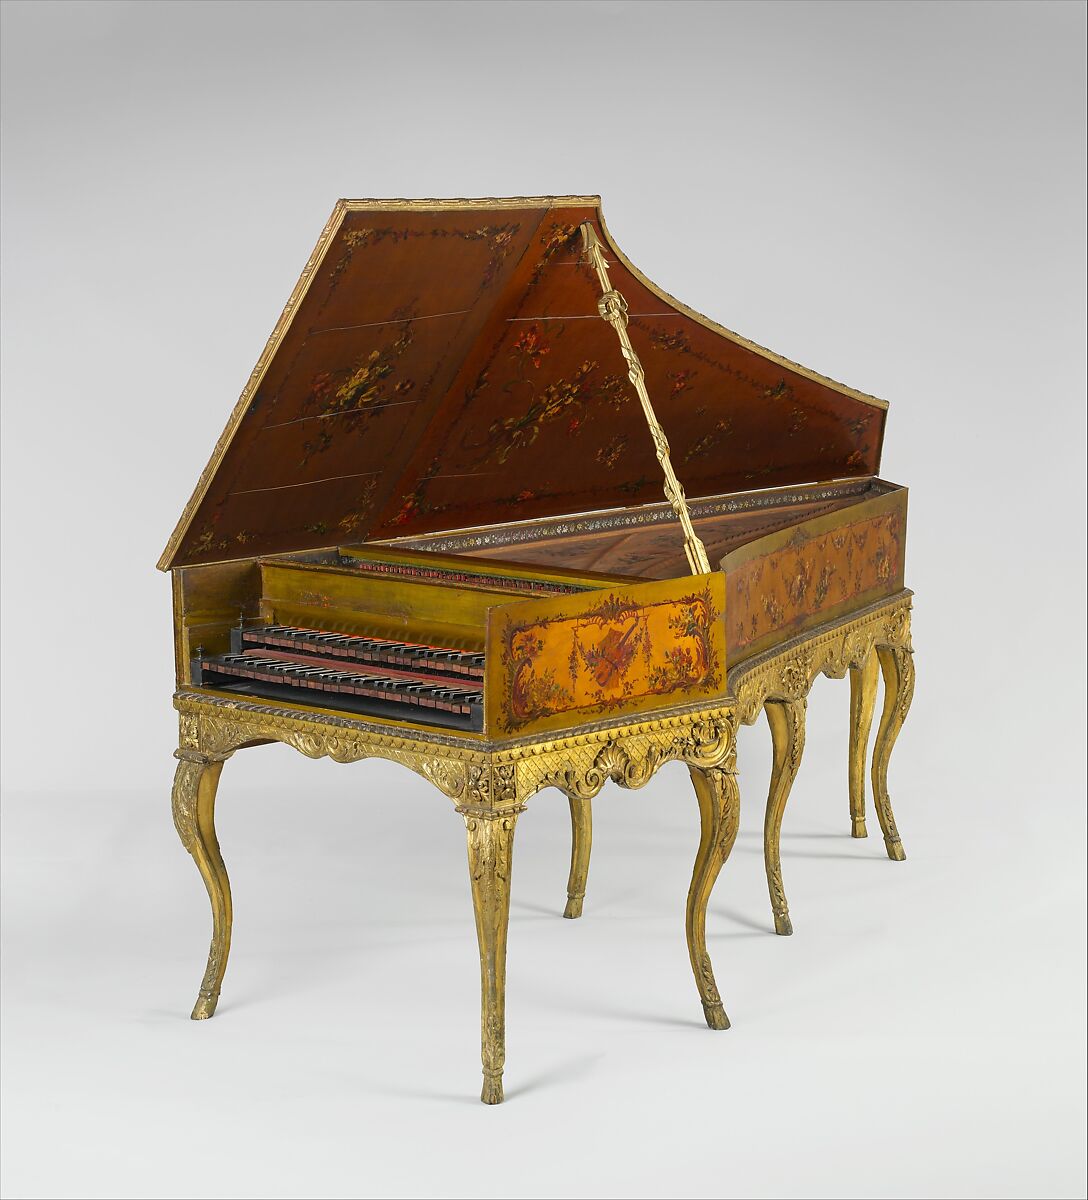 Harpsichord, Louis Bellot  French, Wood and various materials, French